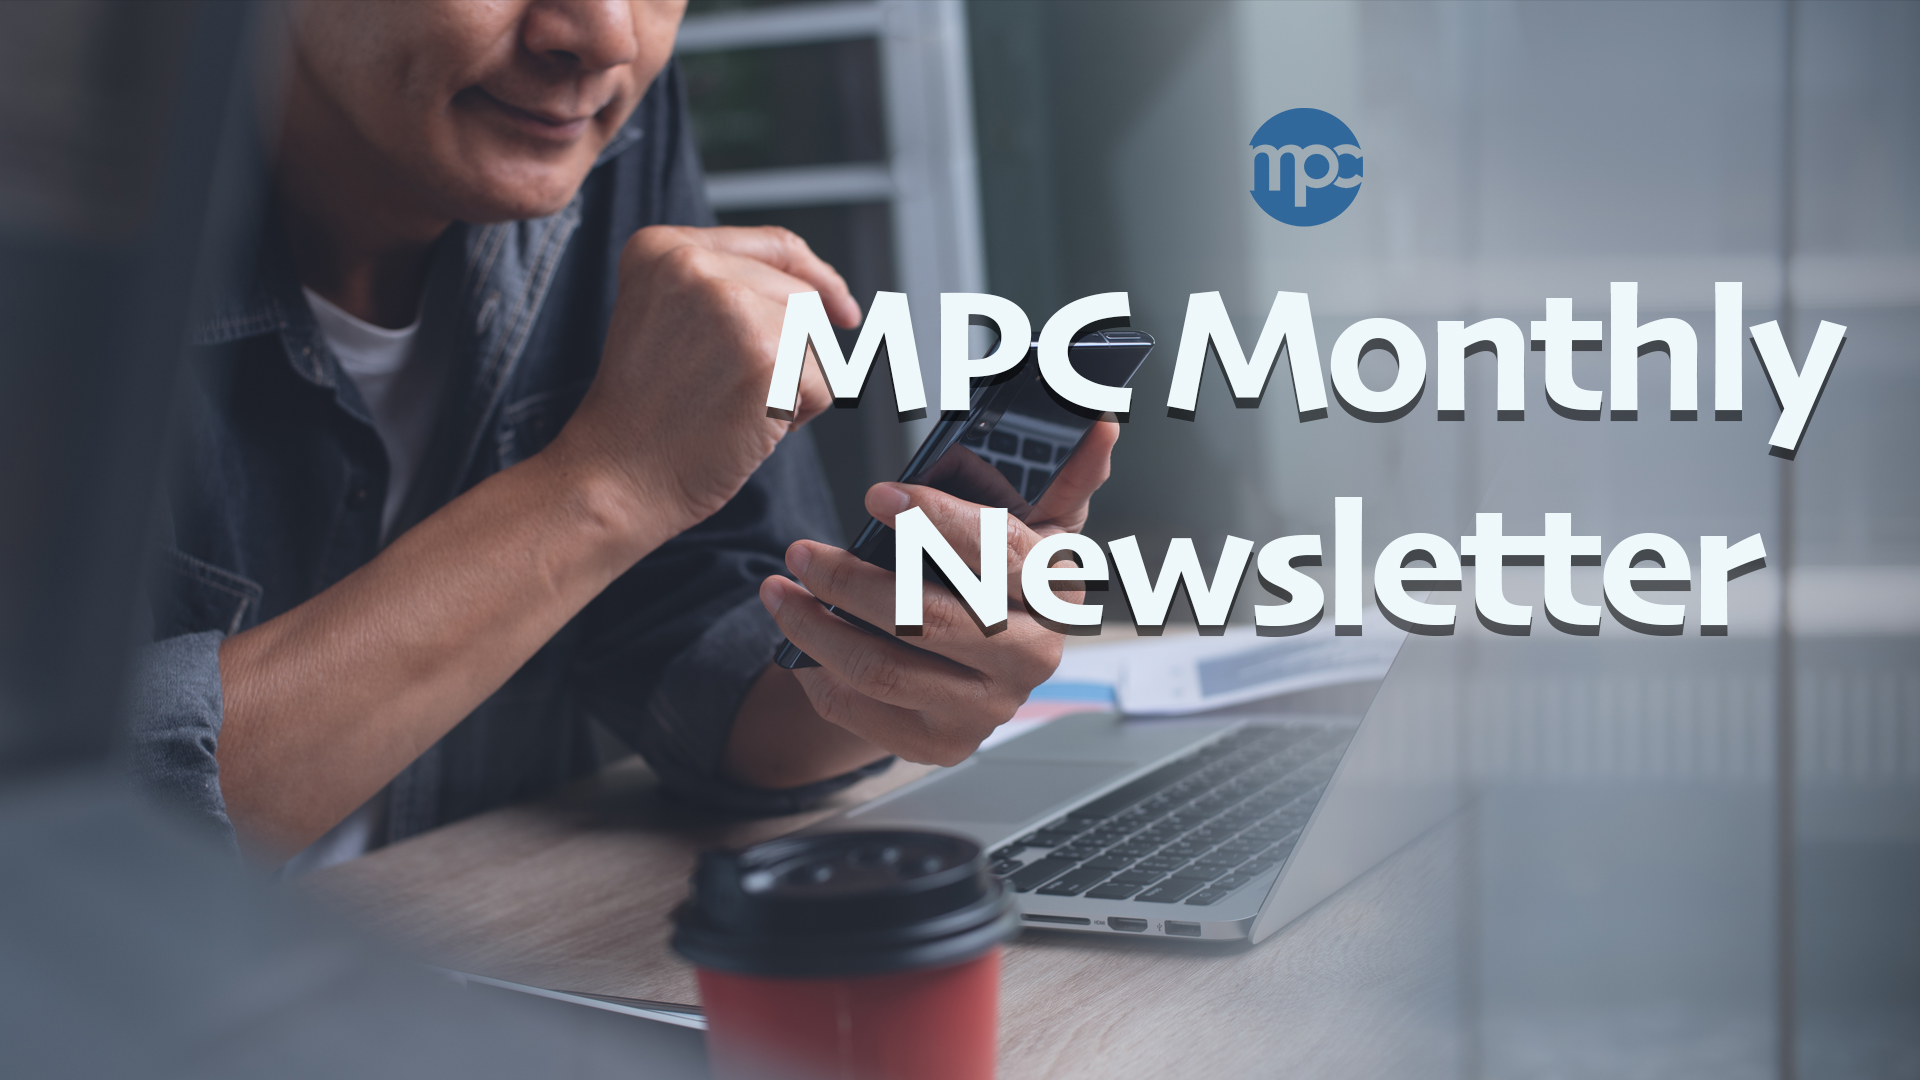 MPC Monthly Newsletter

This newsletter contains all the ministries, classes, events and updates happening this month.
